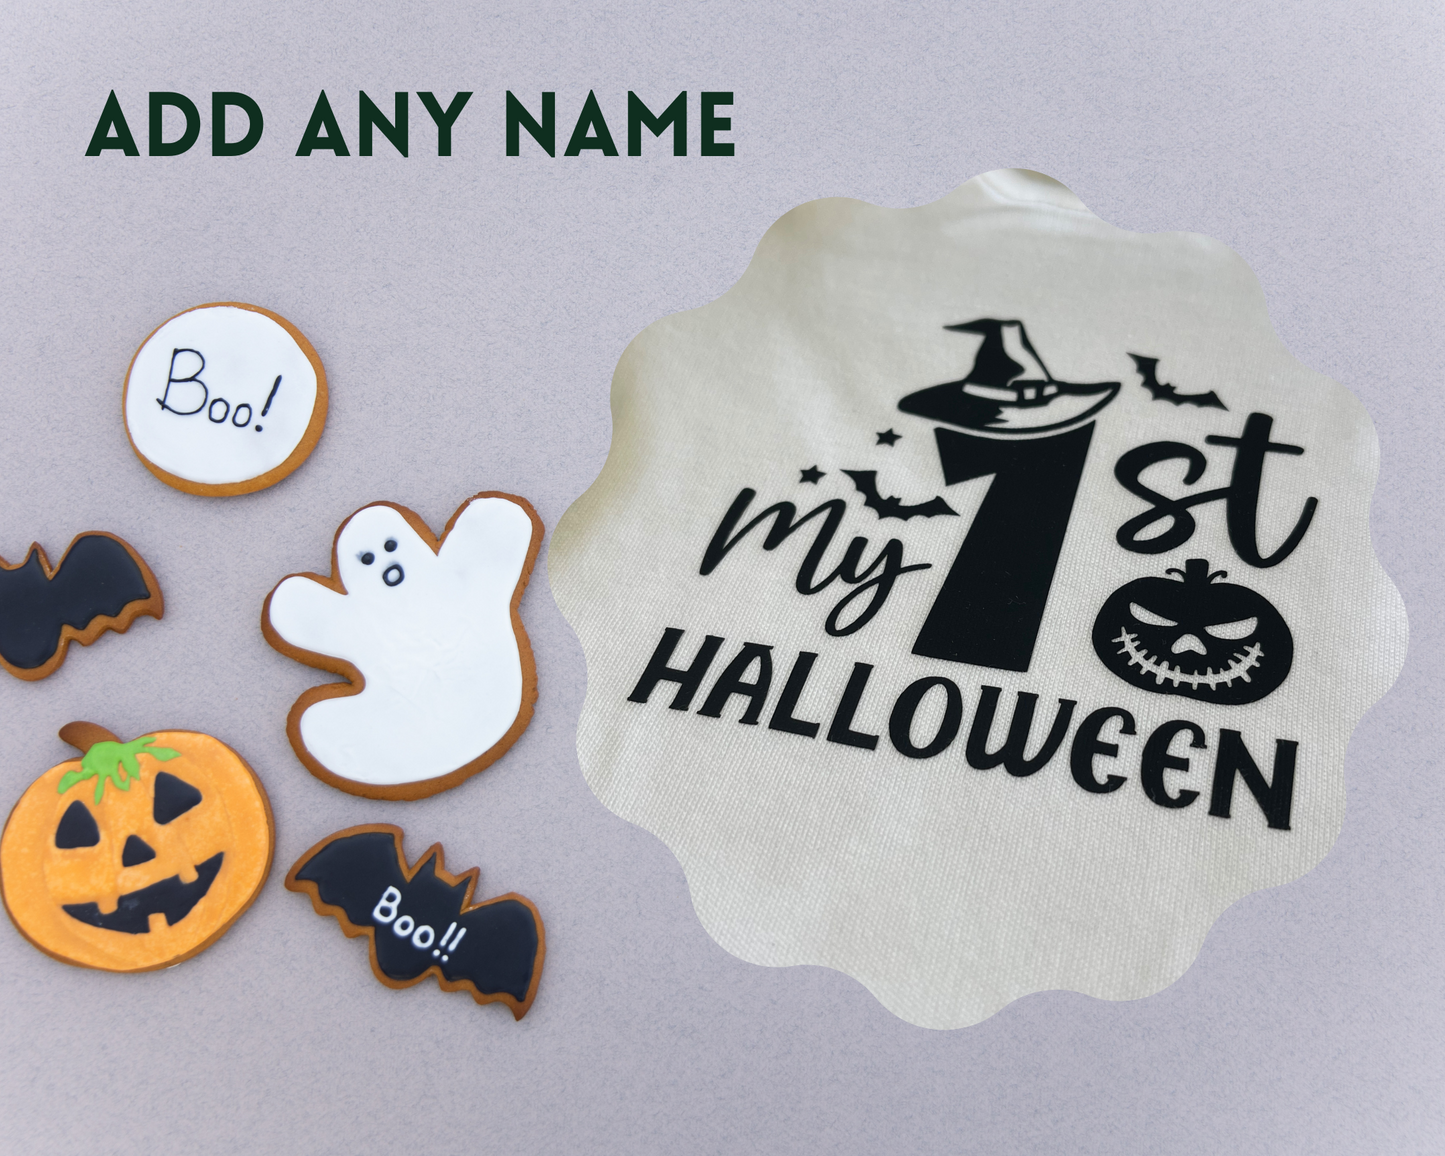 Personalised First Halloween Day Bodysuit